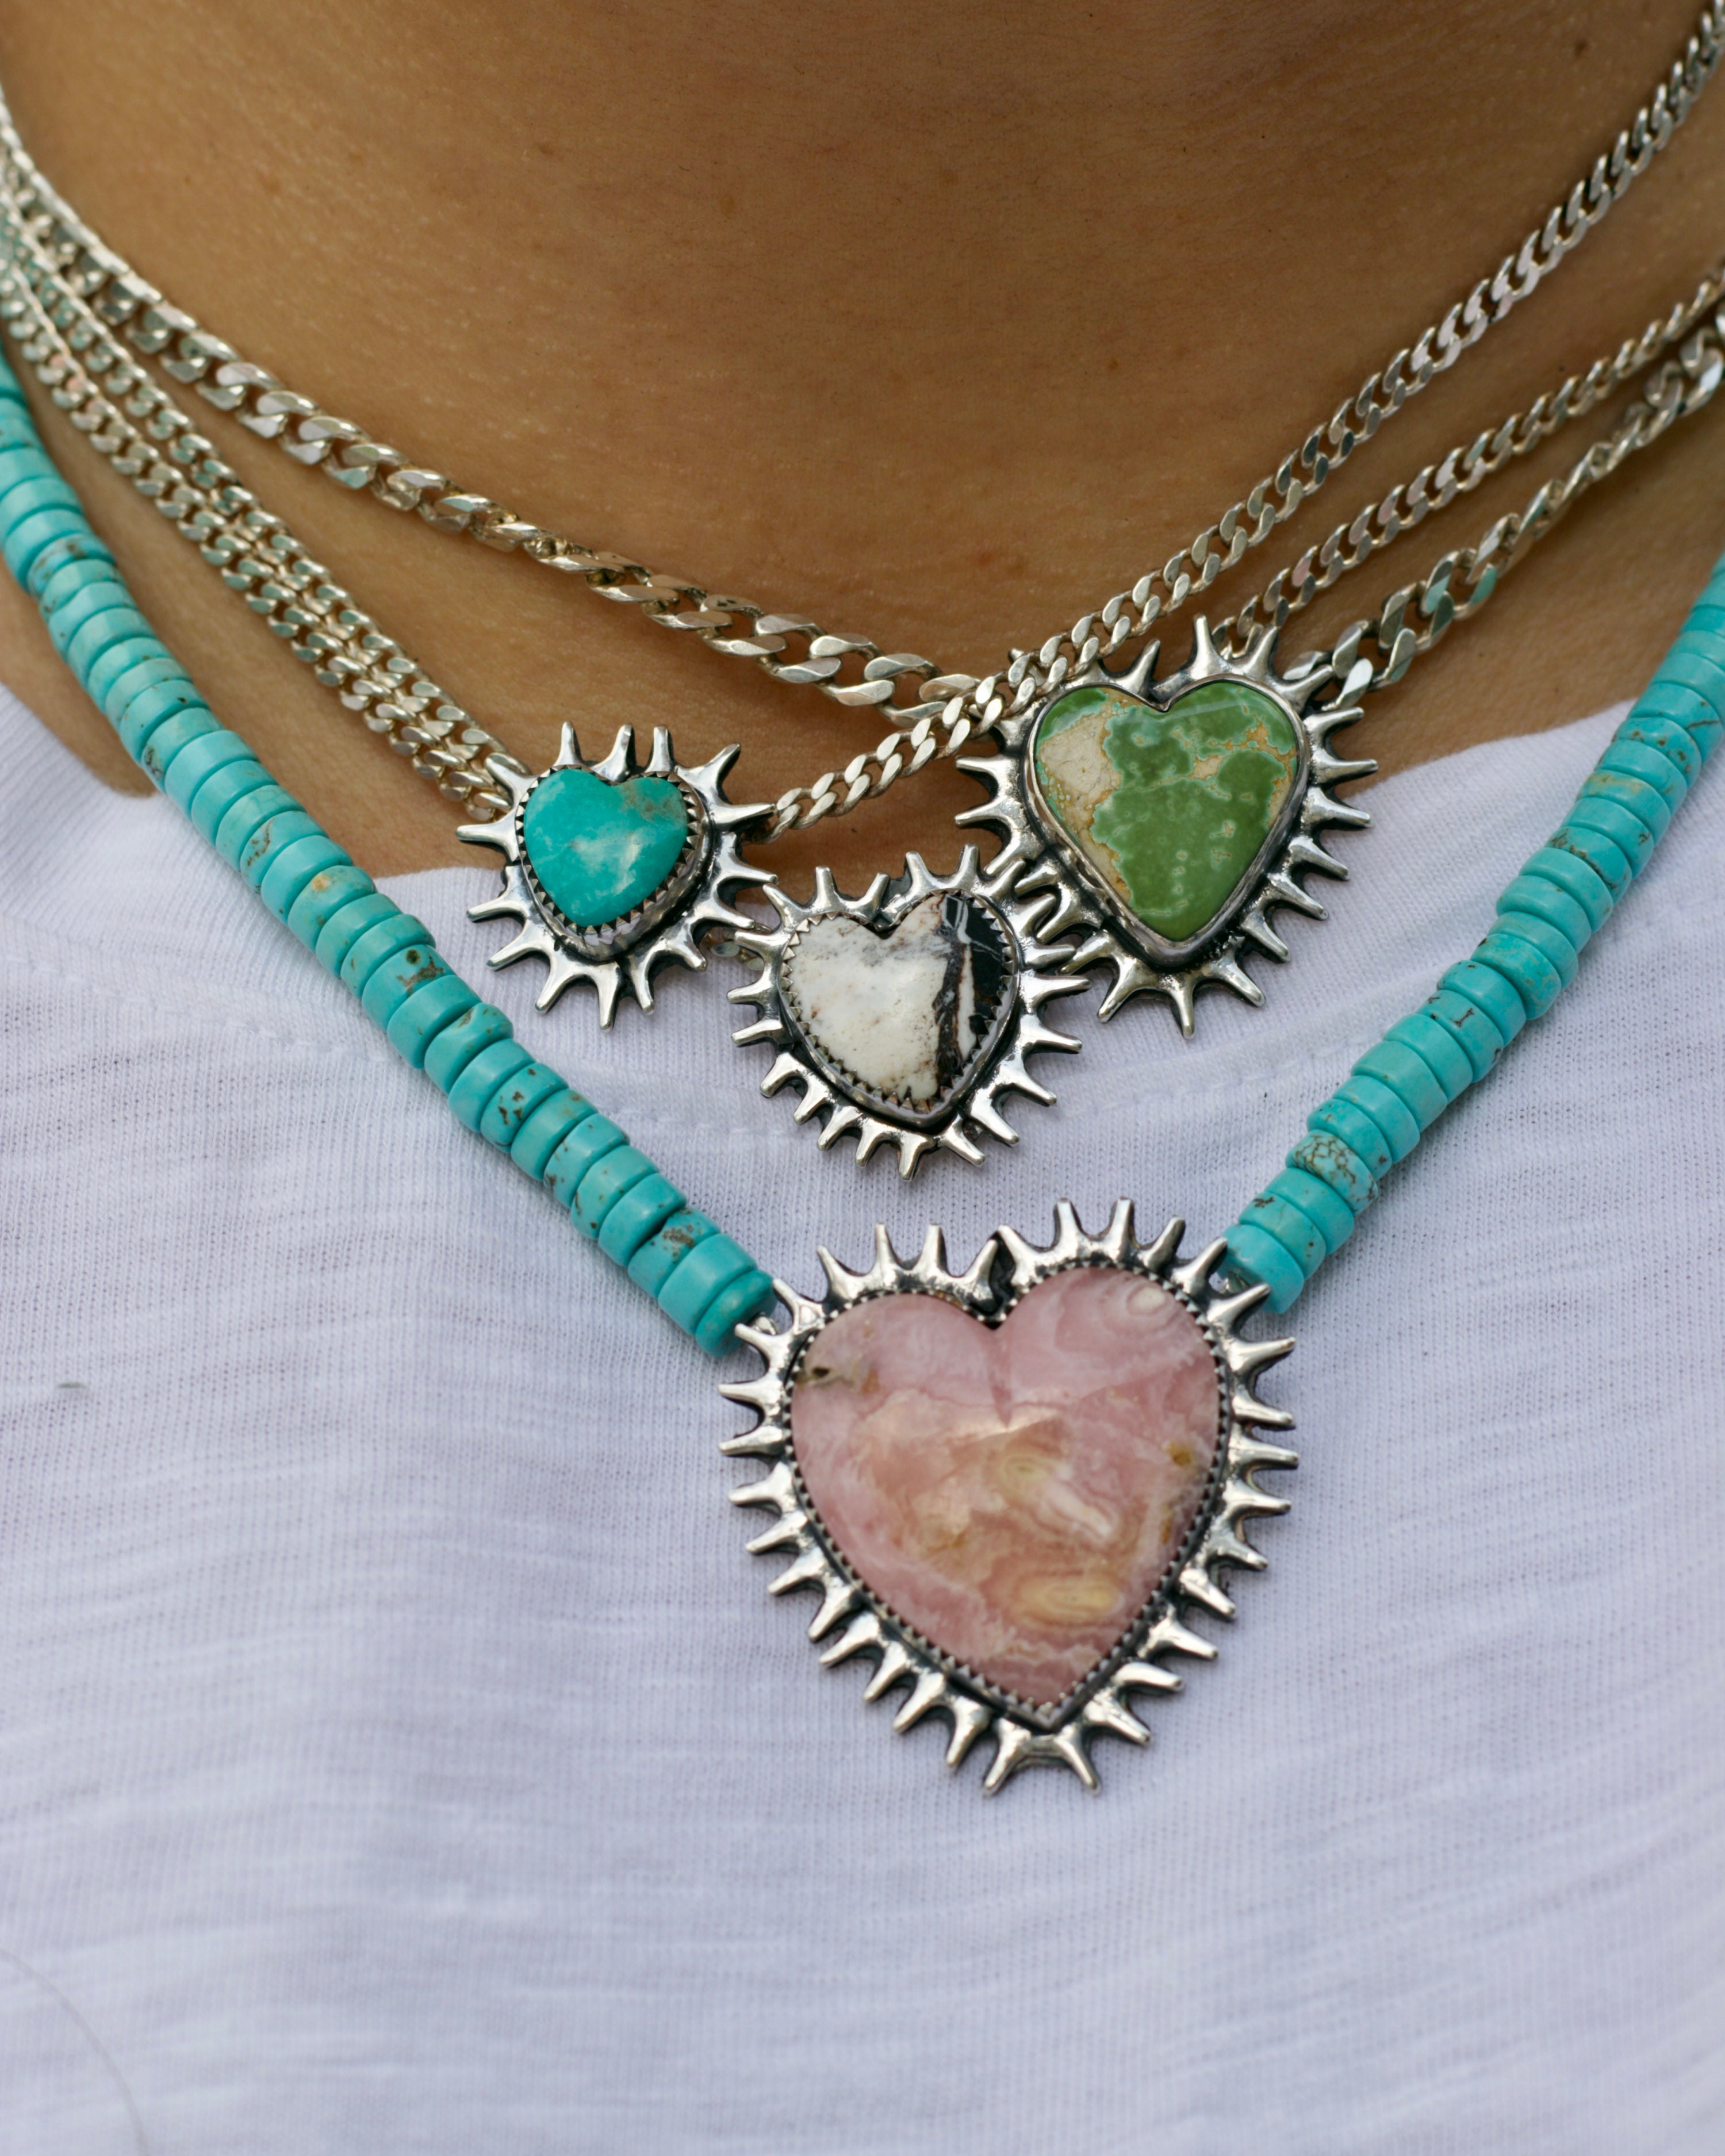 Strong Heart chocker / necklace. Rhodochrosite w/ turquoise beads